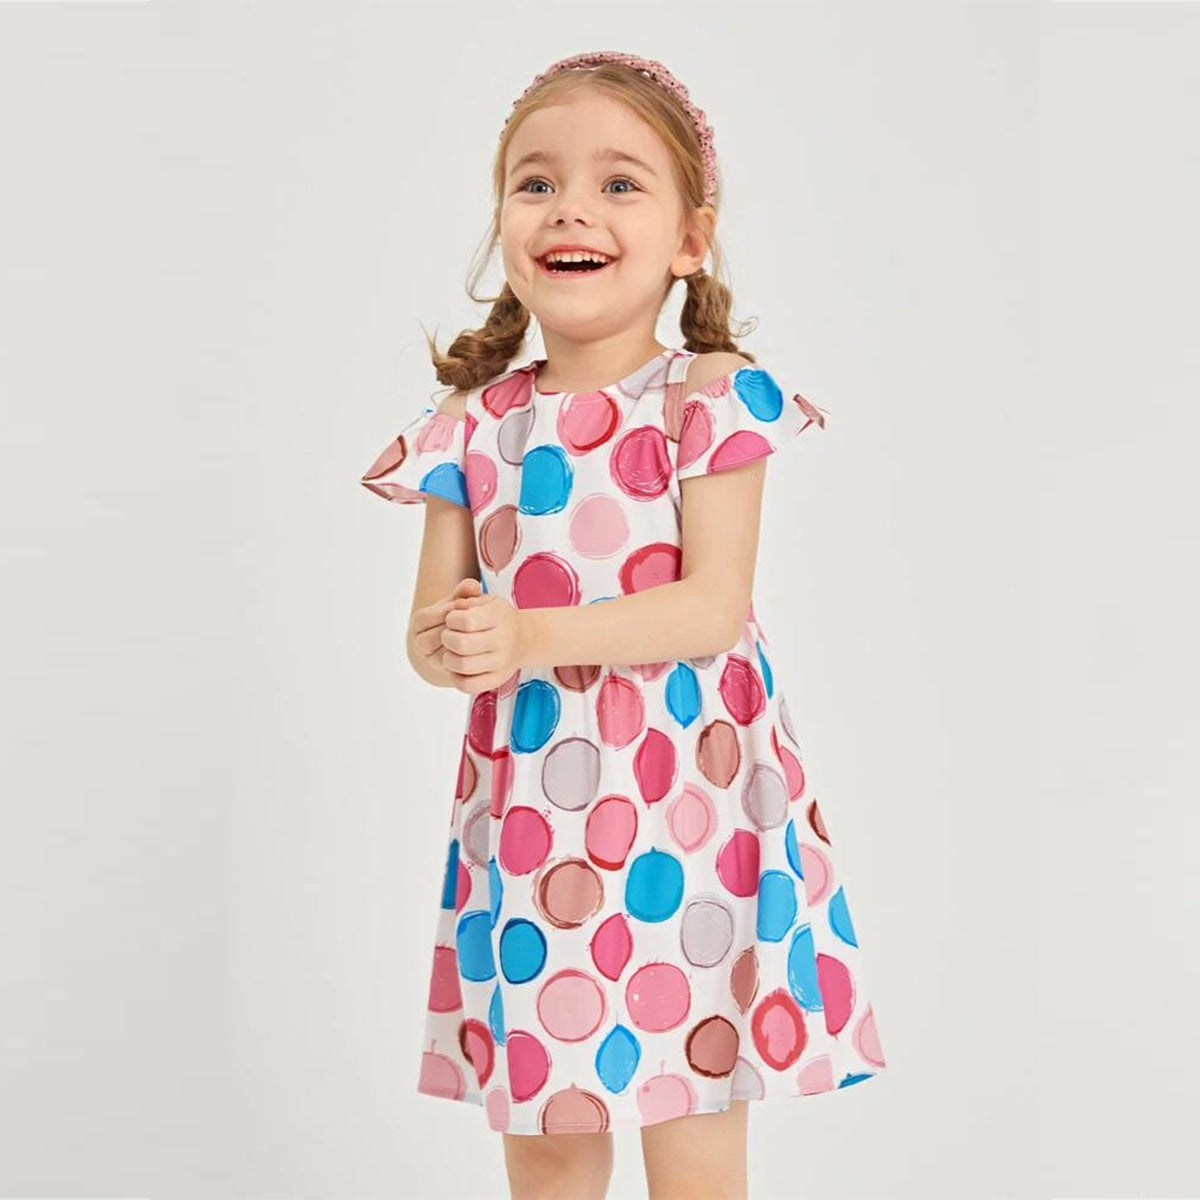 Kids New Fashion Multicolor Round Frock & Dress for Baby Girls.